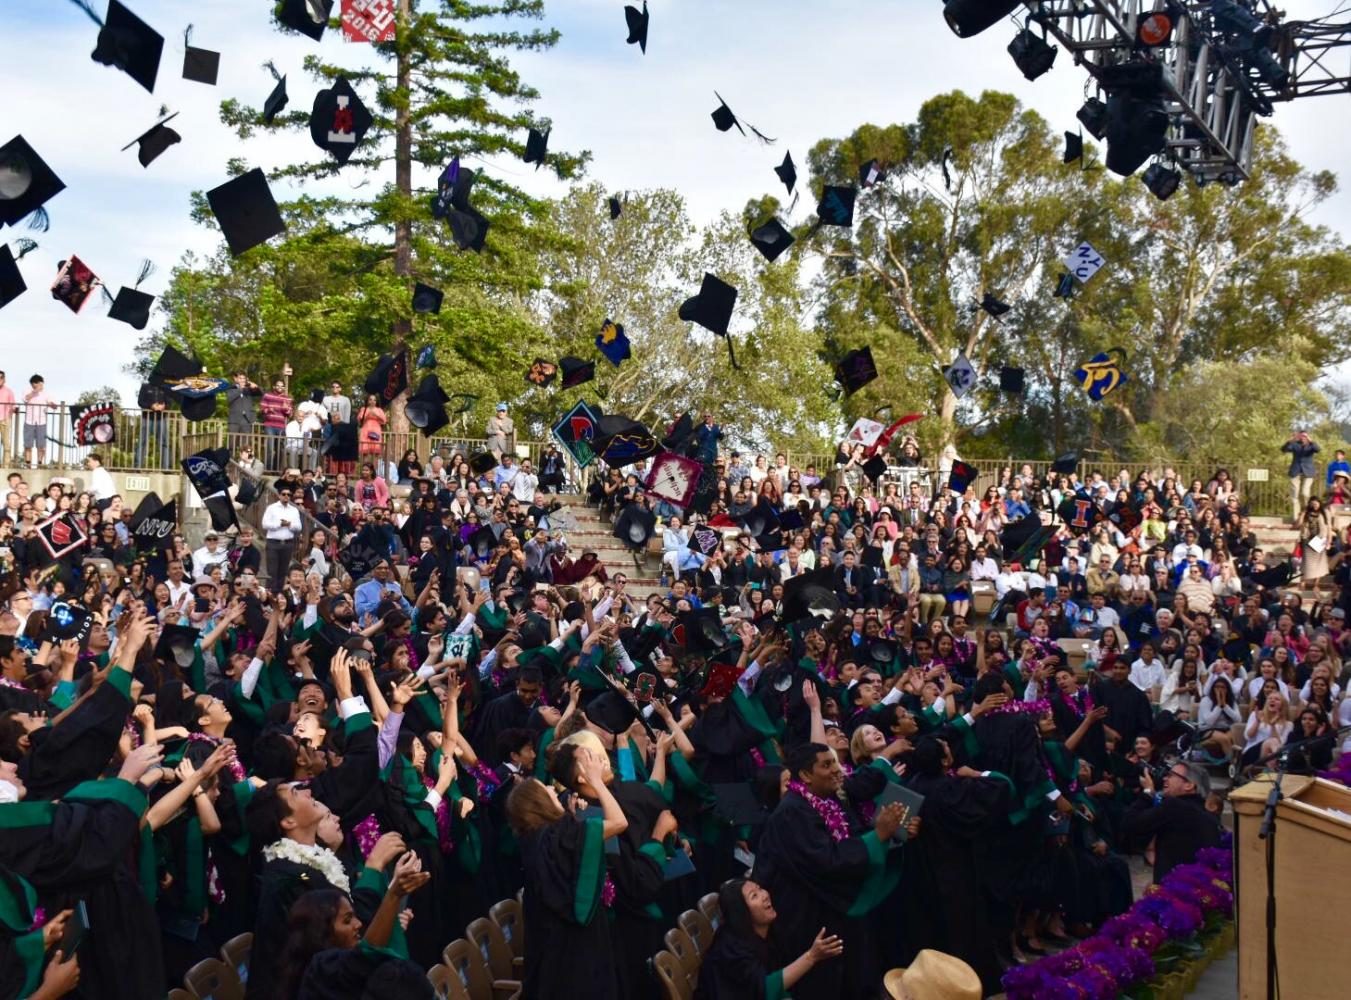 The class of 2016 tosses their hats into the air at last years graduation ceremony at the Saratoga Mountain Winery. This year, graduation will take place at the Mountain Winery on May 18.